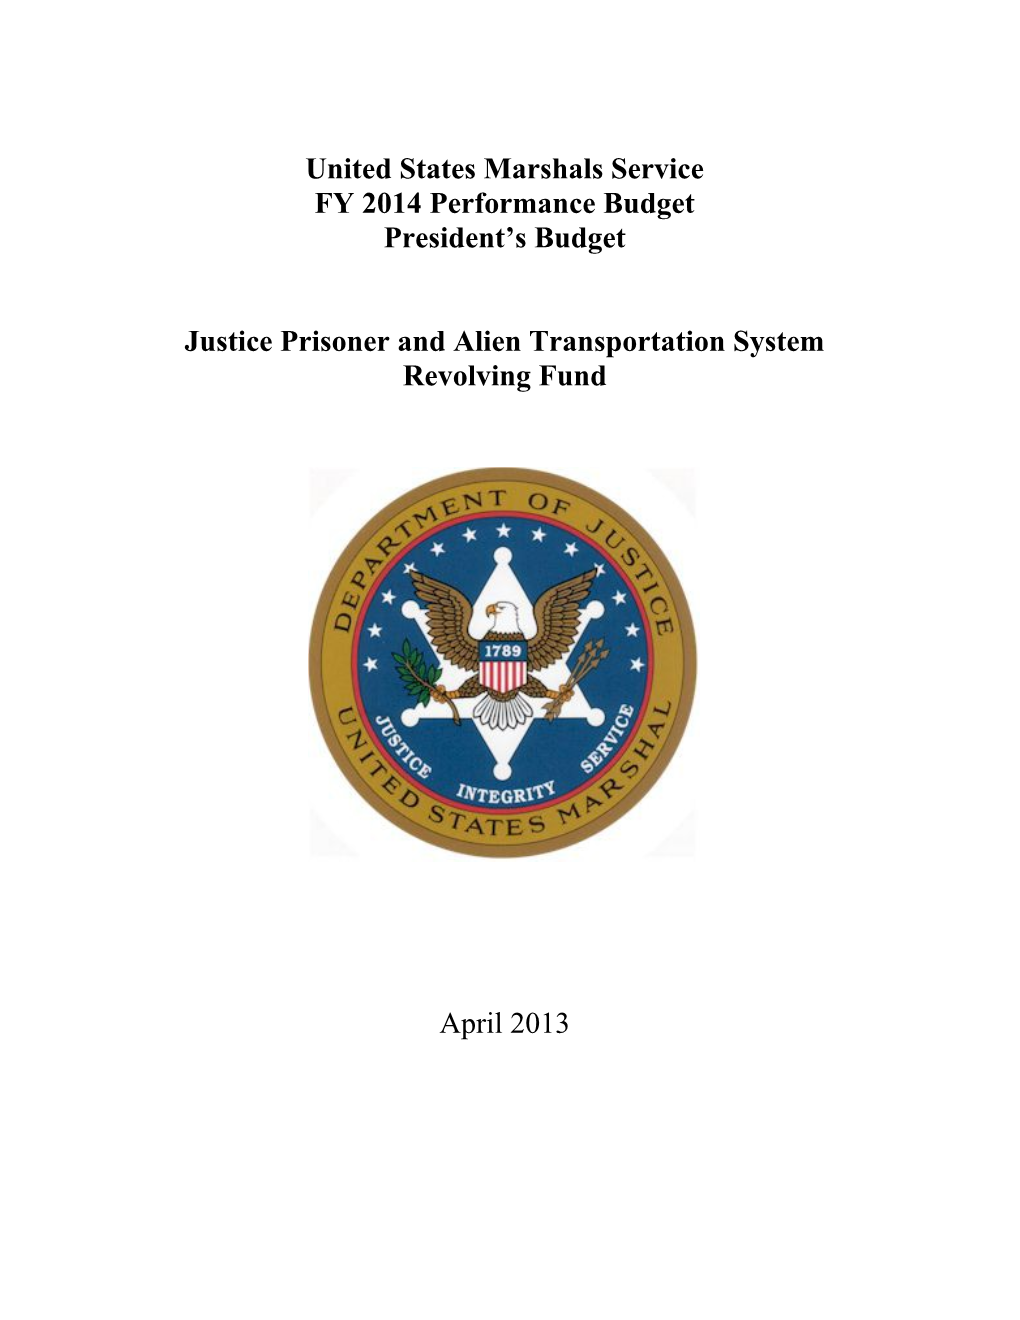 OMB 2014 Budget Submission